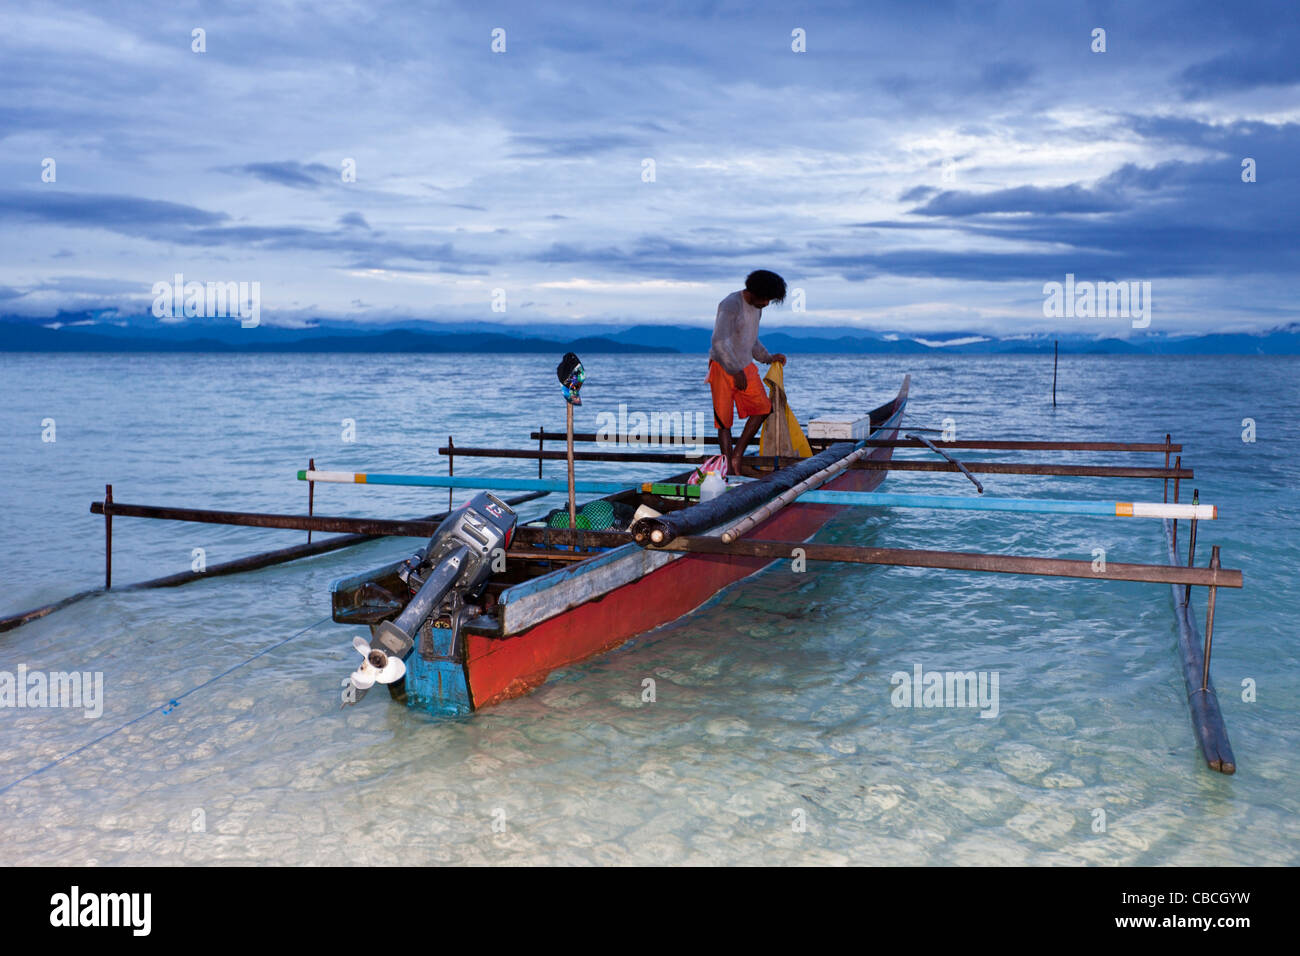 Fisherman on Outrigger Boat, Cenderawasih Bay, West Papua, Indonesia Stock Photo